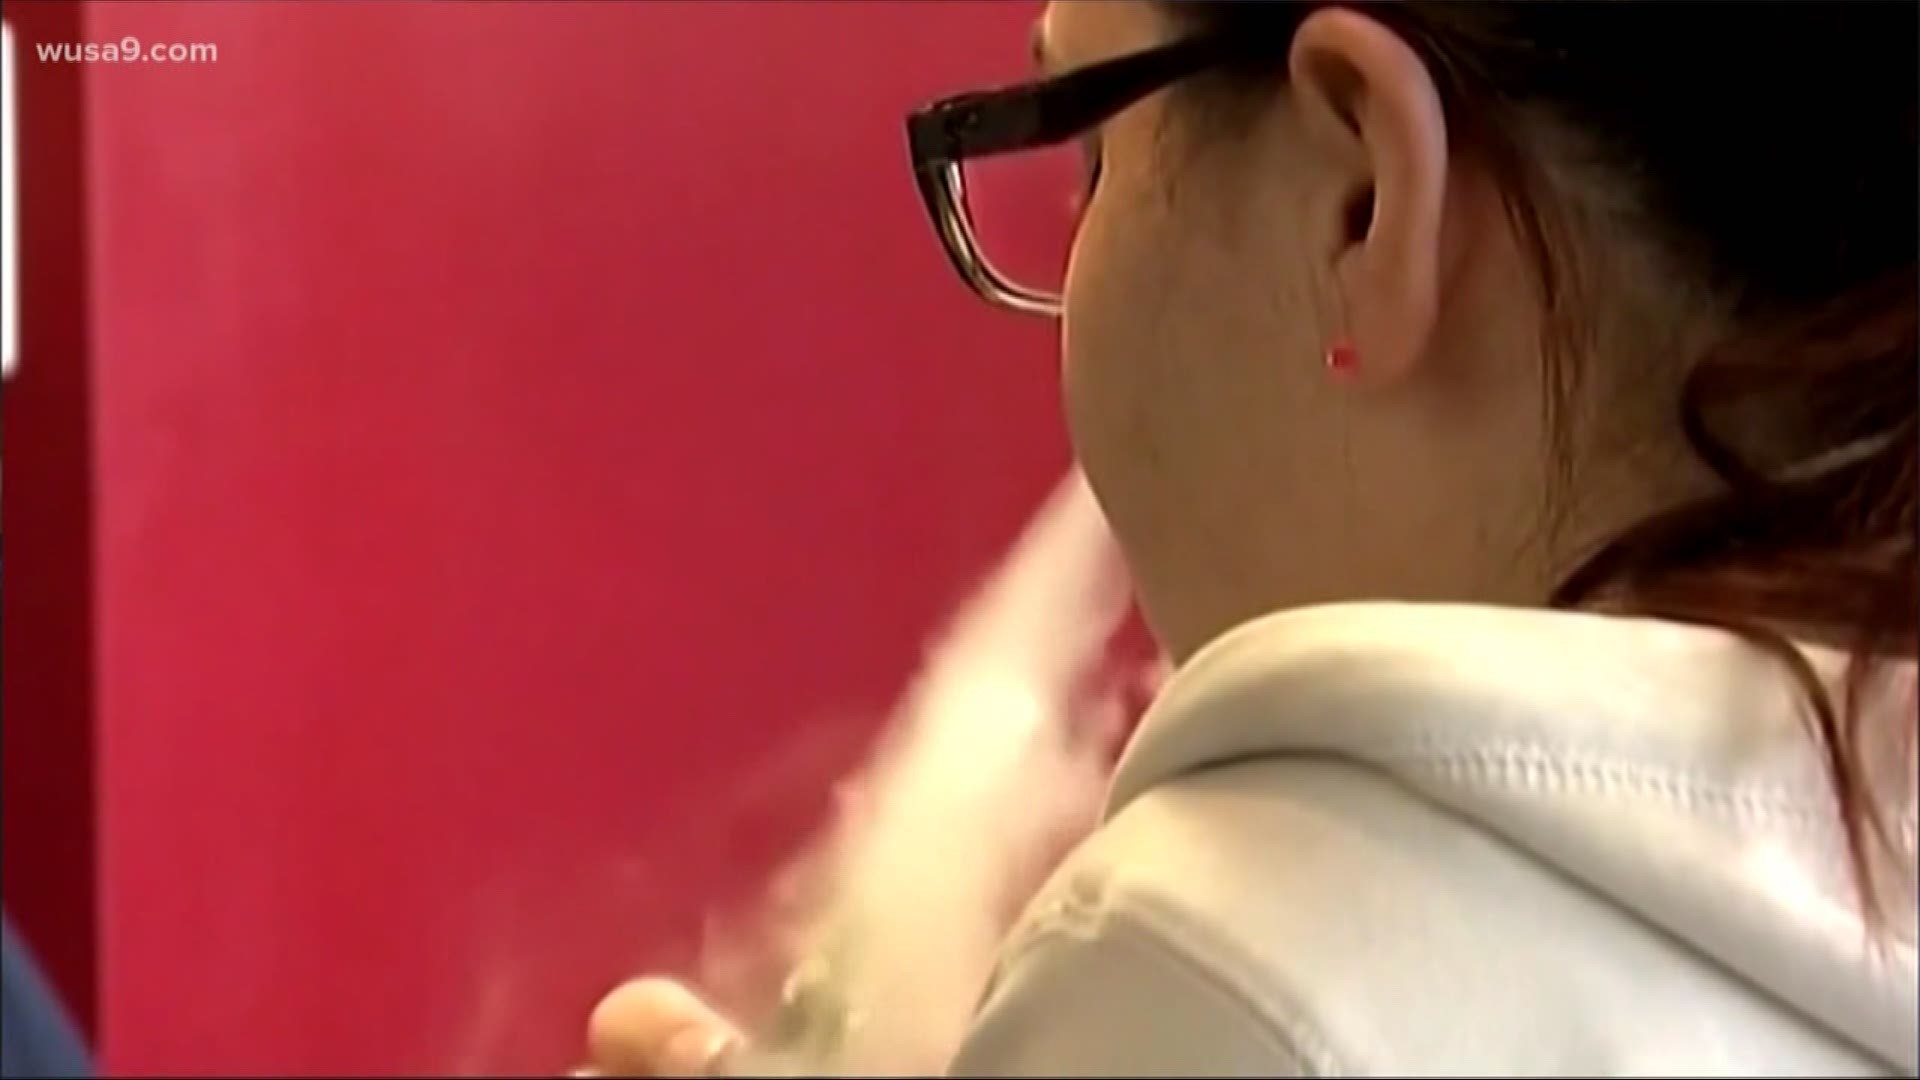 Nathan Baca breaks down the vaping industry and the new laws that are affecting it.